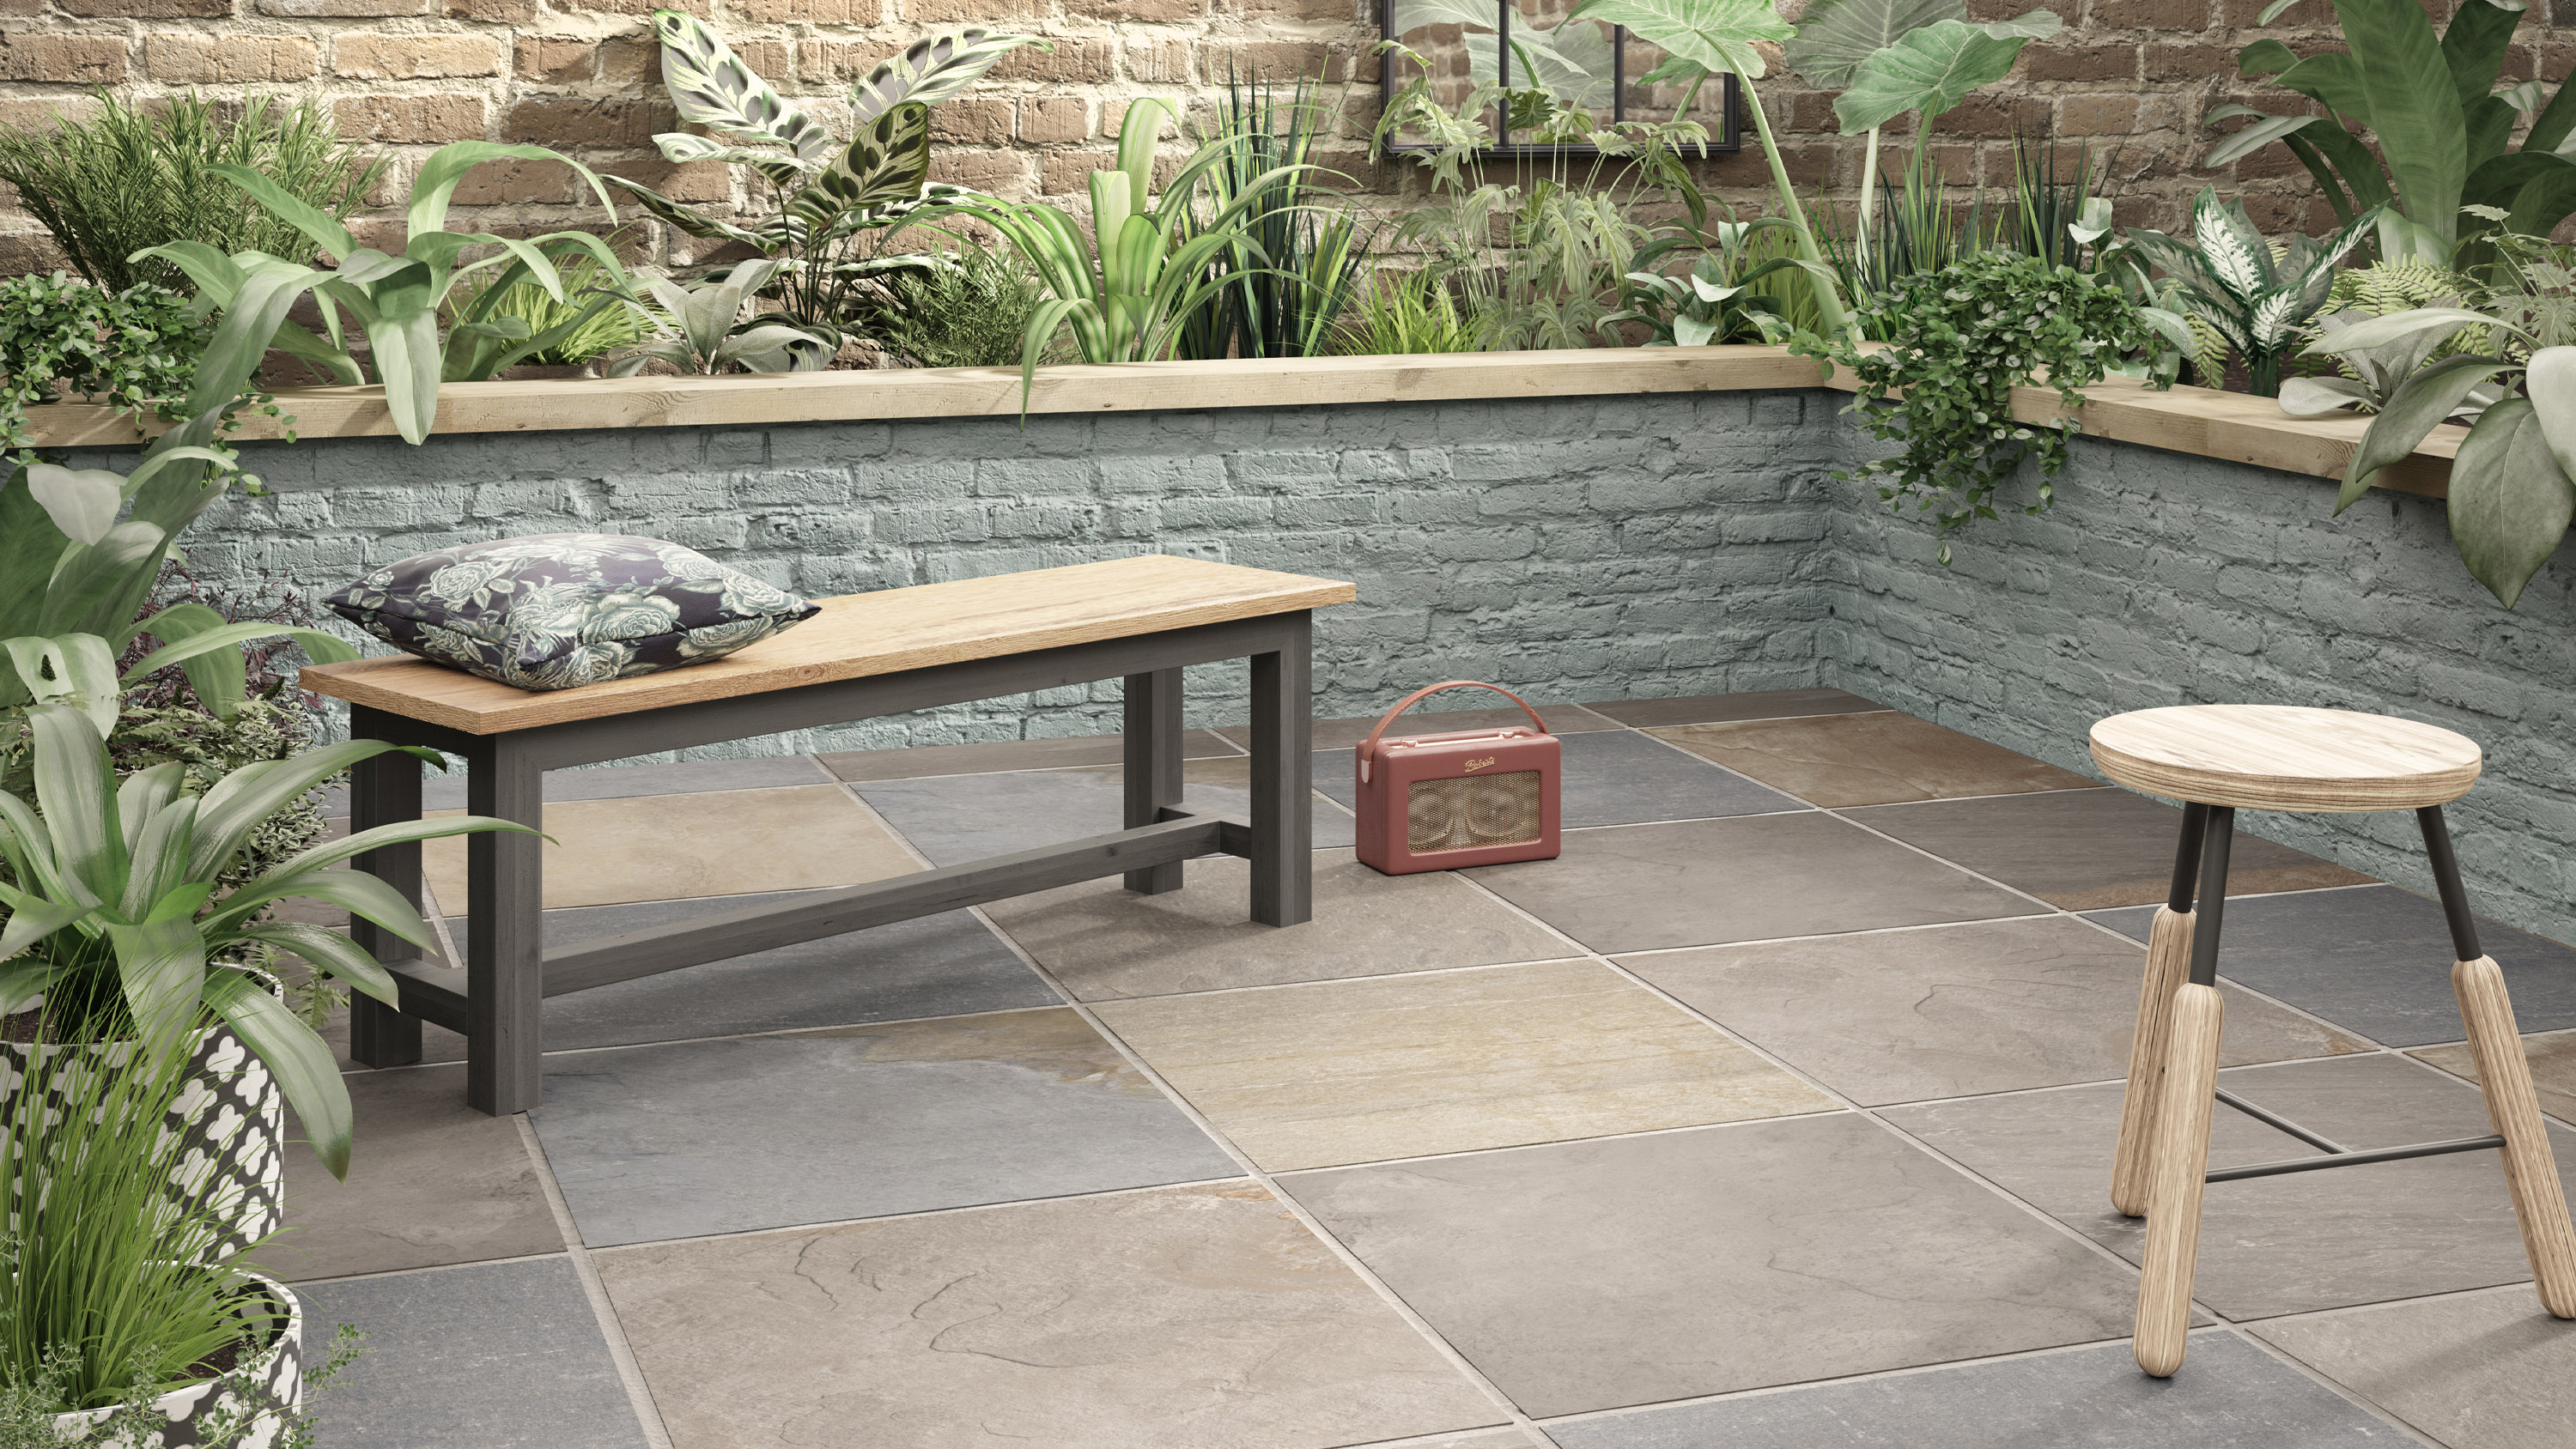 How To Lay Porcelain Tiles Outside, What Tile To Use For Outdoor Patio